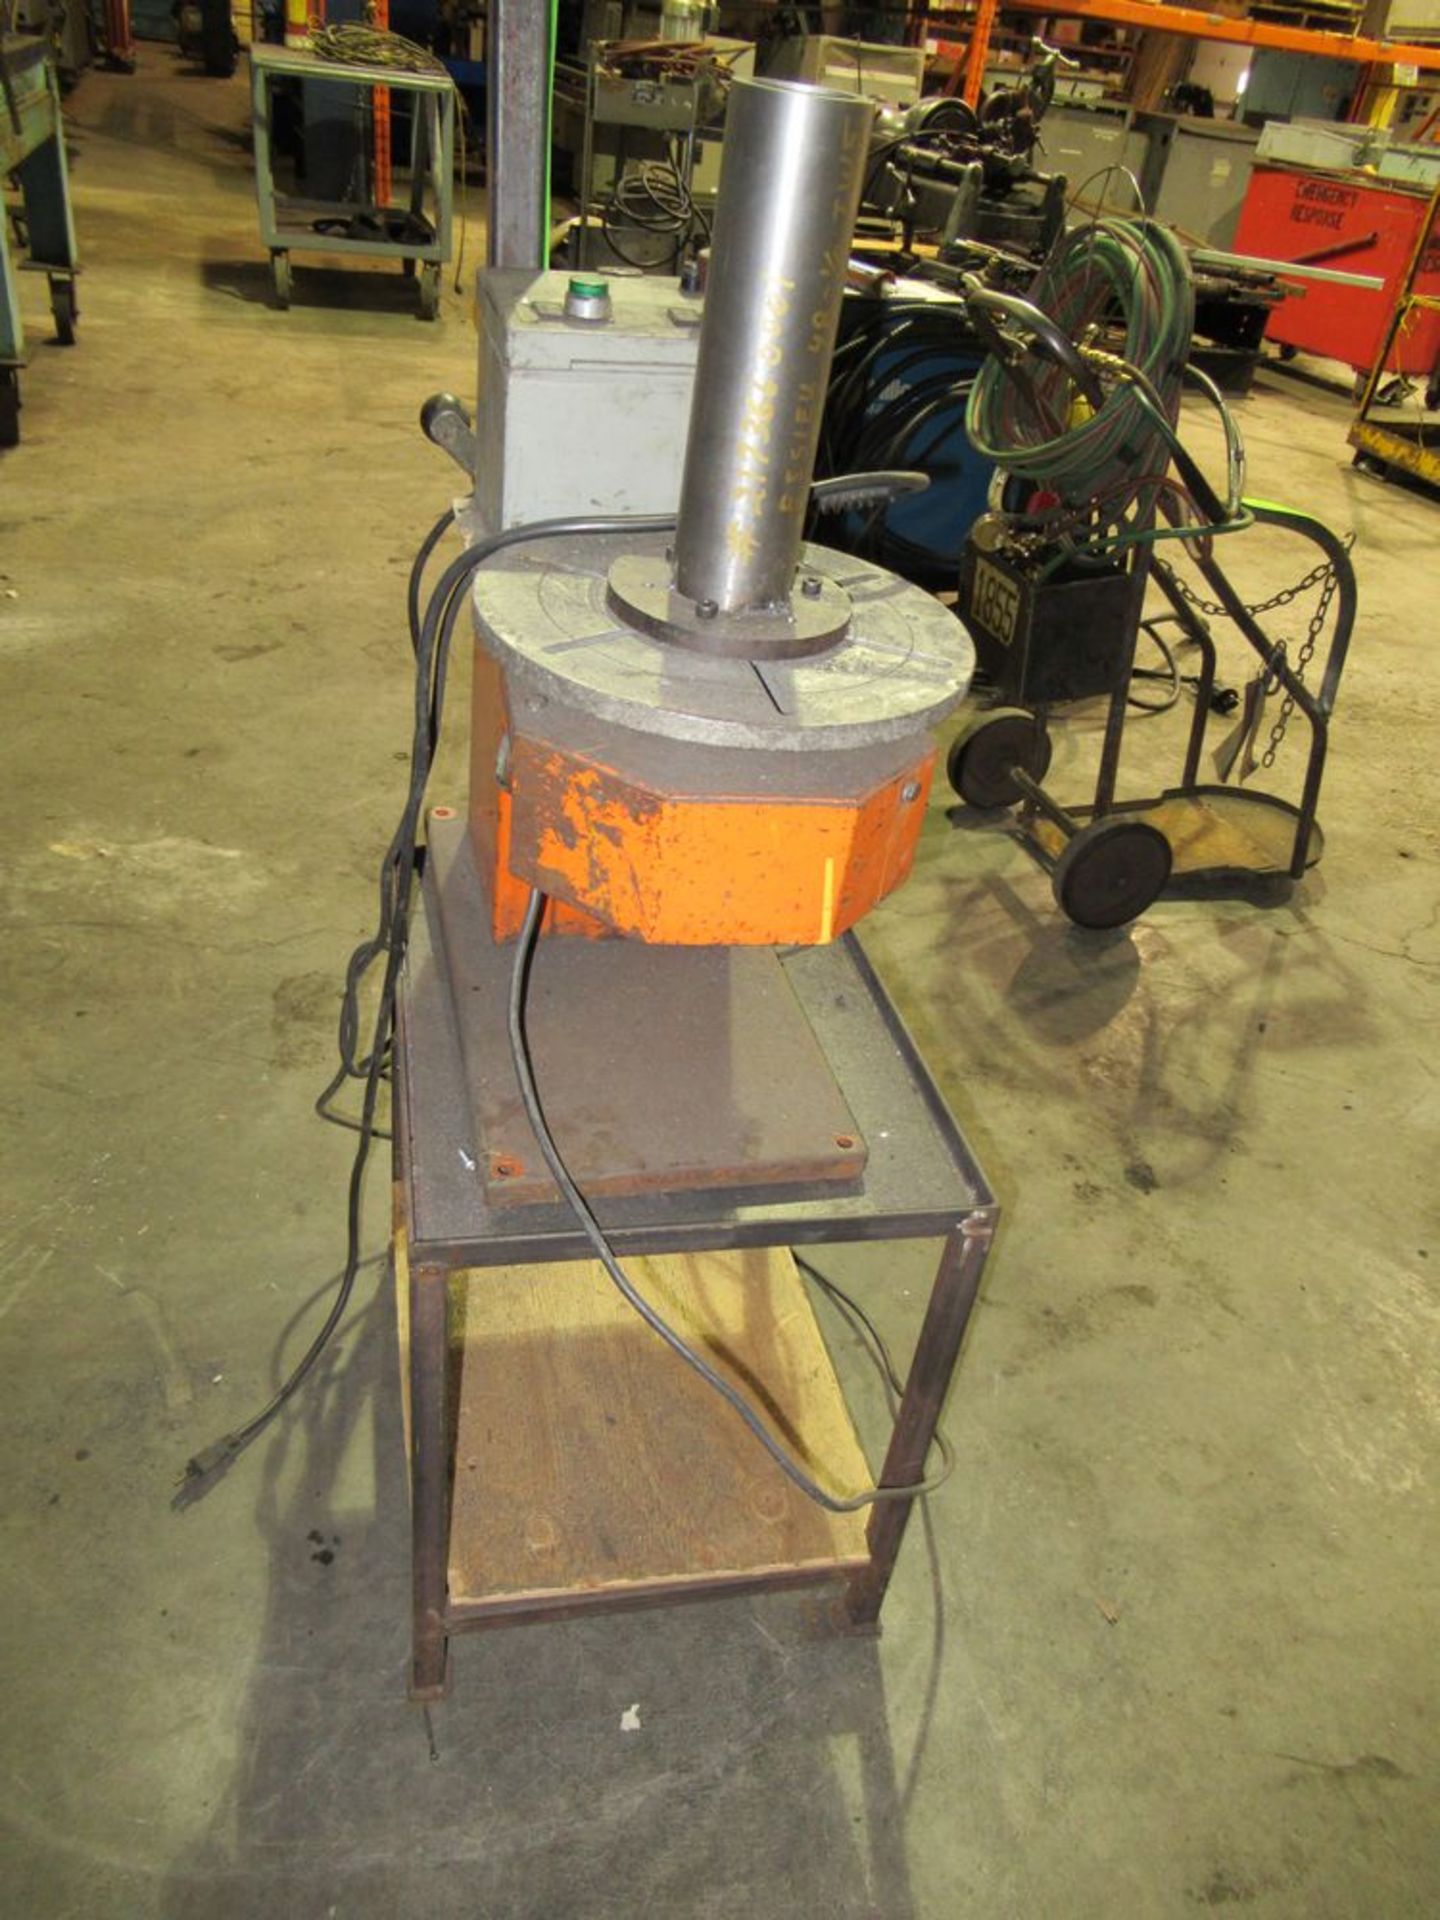 Gullco Equip. For Automated Welding & Cutting Turn Table ( Loc. Upstairs ) ($25 Rigging Cost)